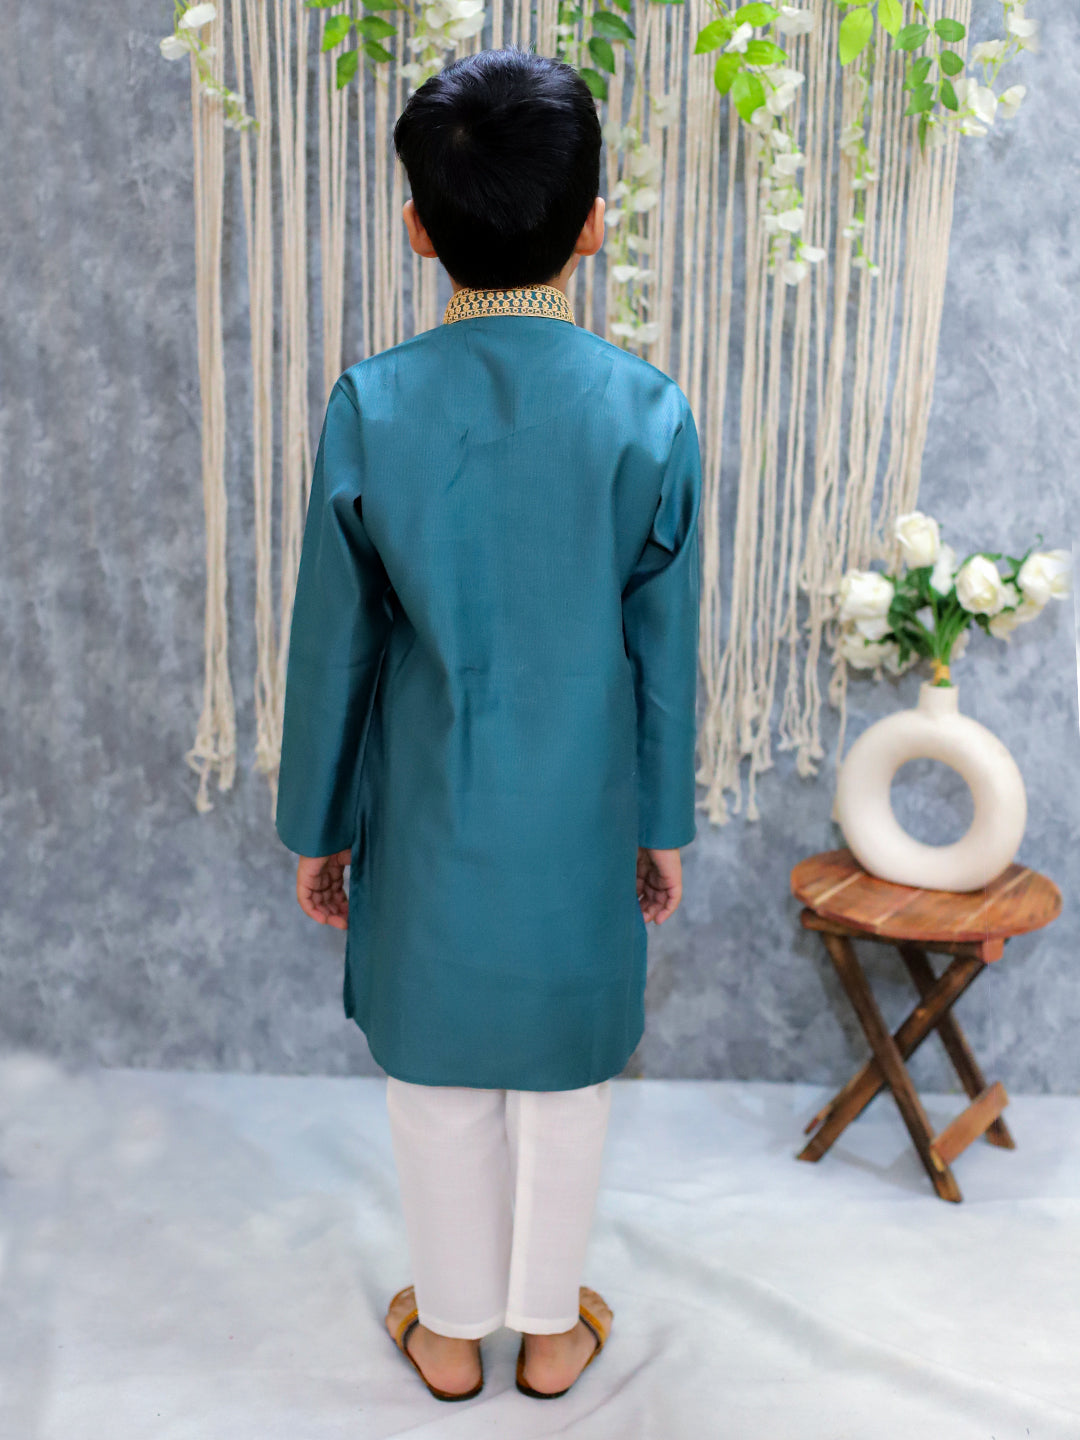 BownBee Embroidery Full Sleeve Cotton Kurta with Pajama for Boys- Green